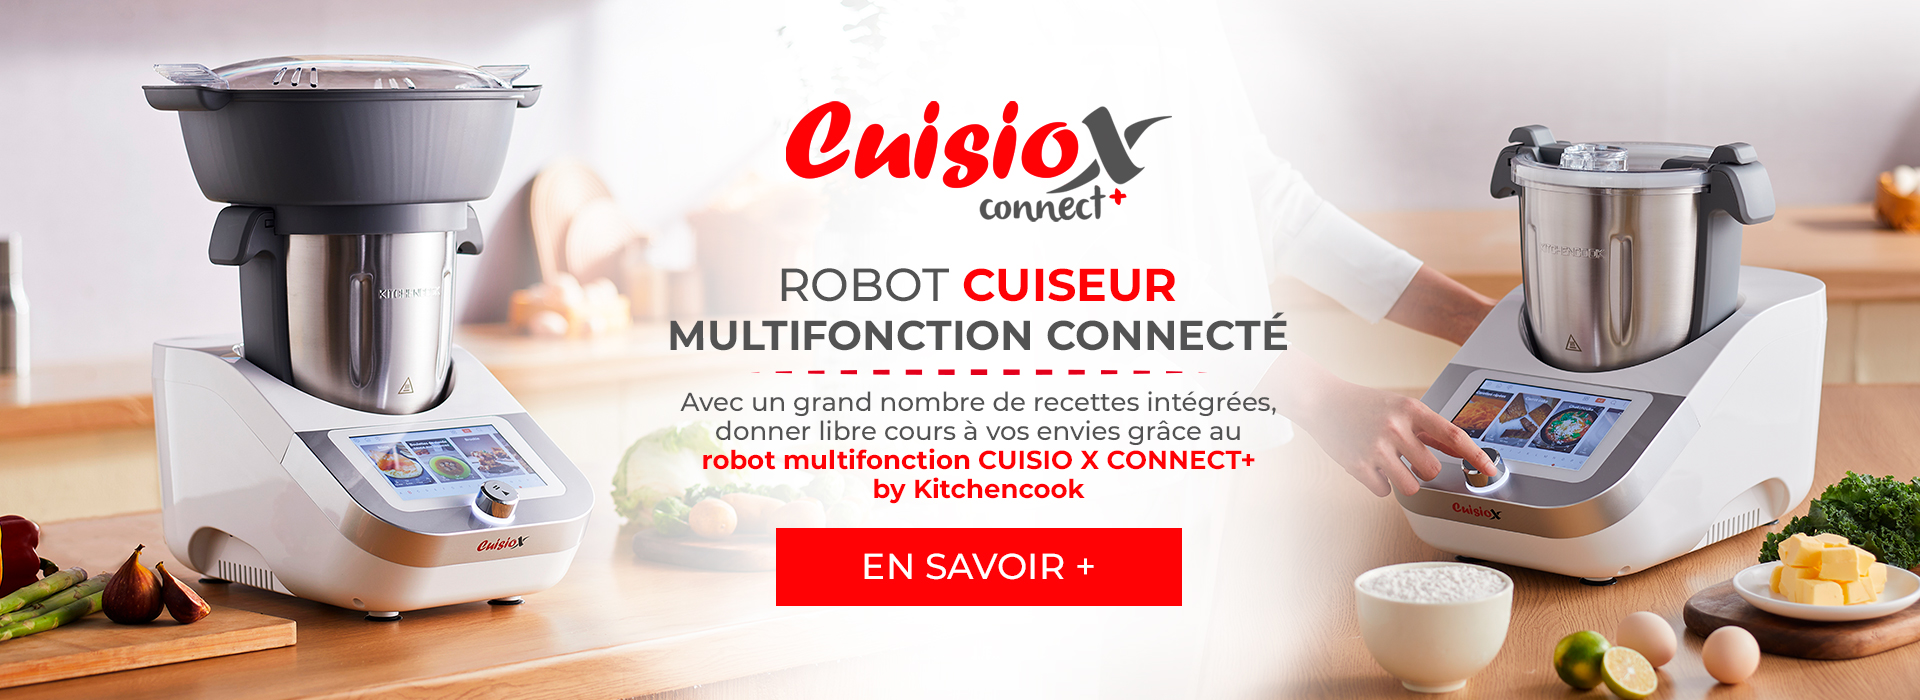 CUISIO X CONNECT+